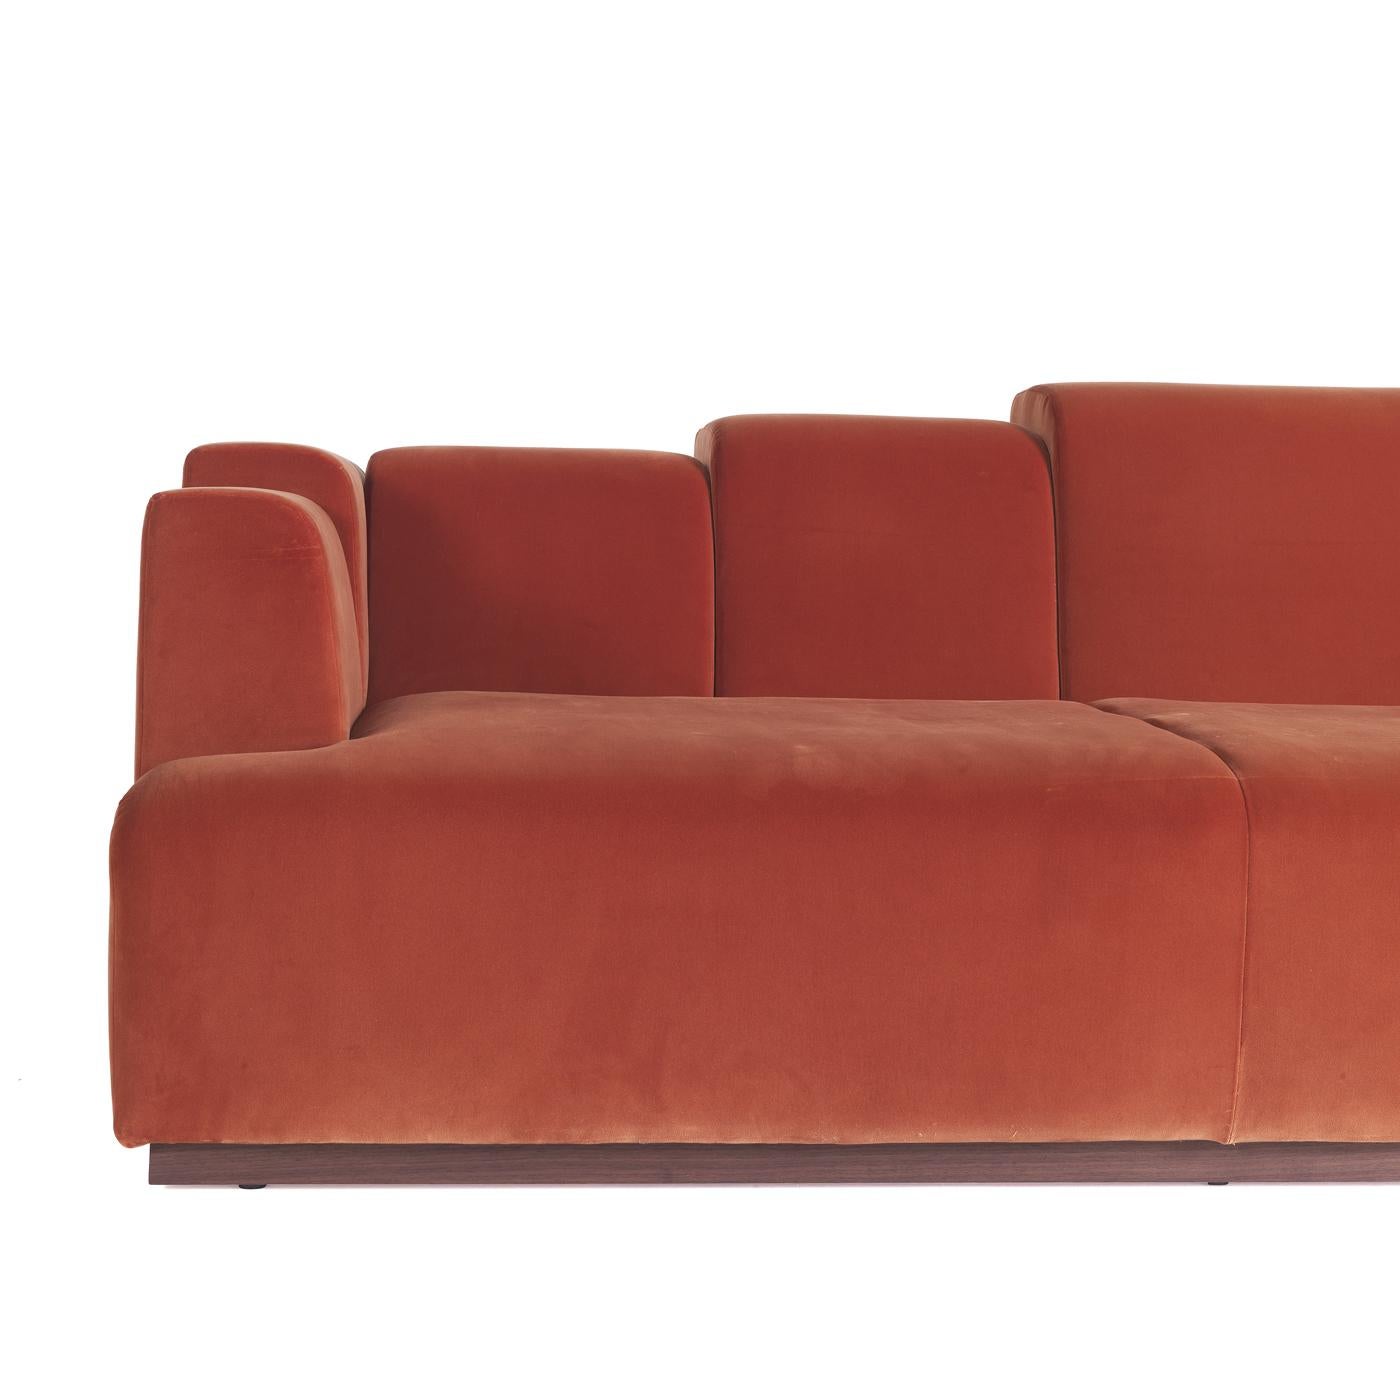 Inspired by the 1980s style, this striking sofa is a one-of-a-kind piece that will make a statement in any living room. Boasting a brick red color, it is marked by a unique back with sections of different measures that create a captivating and